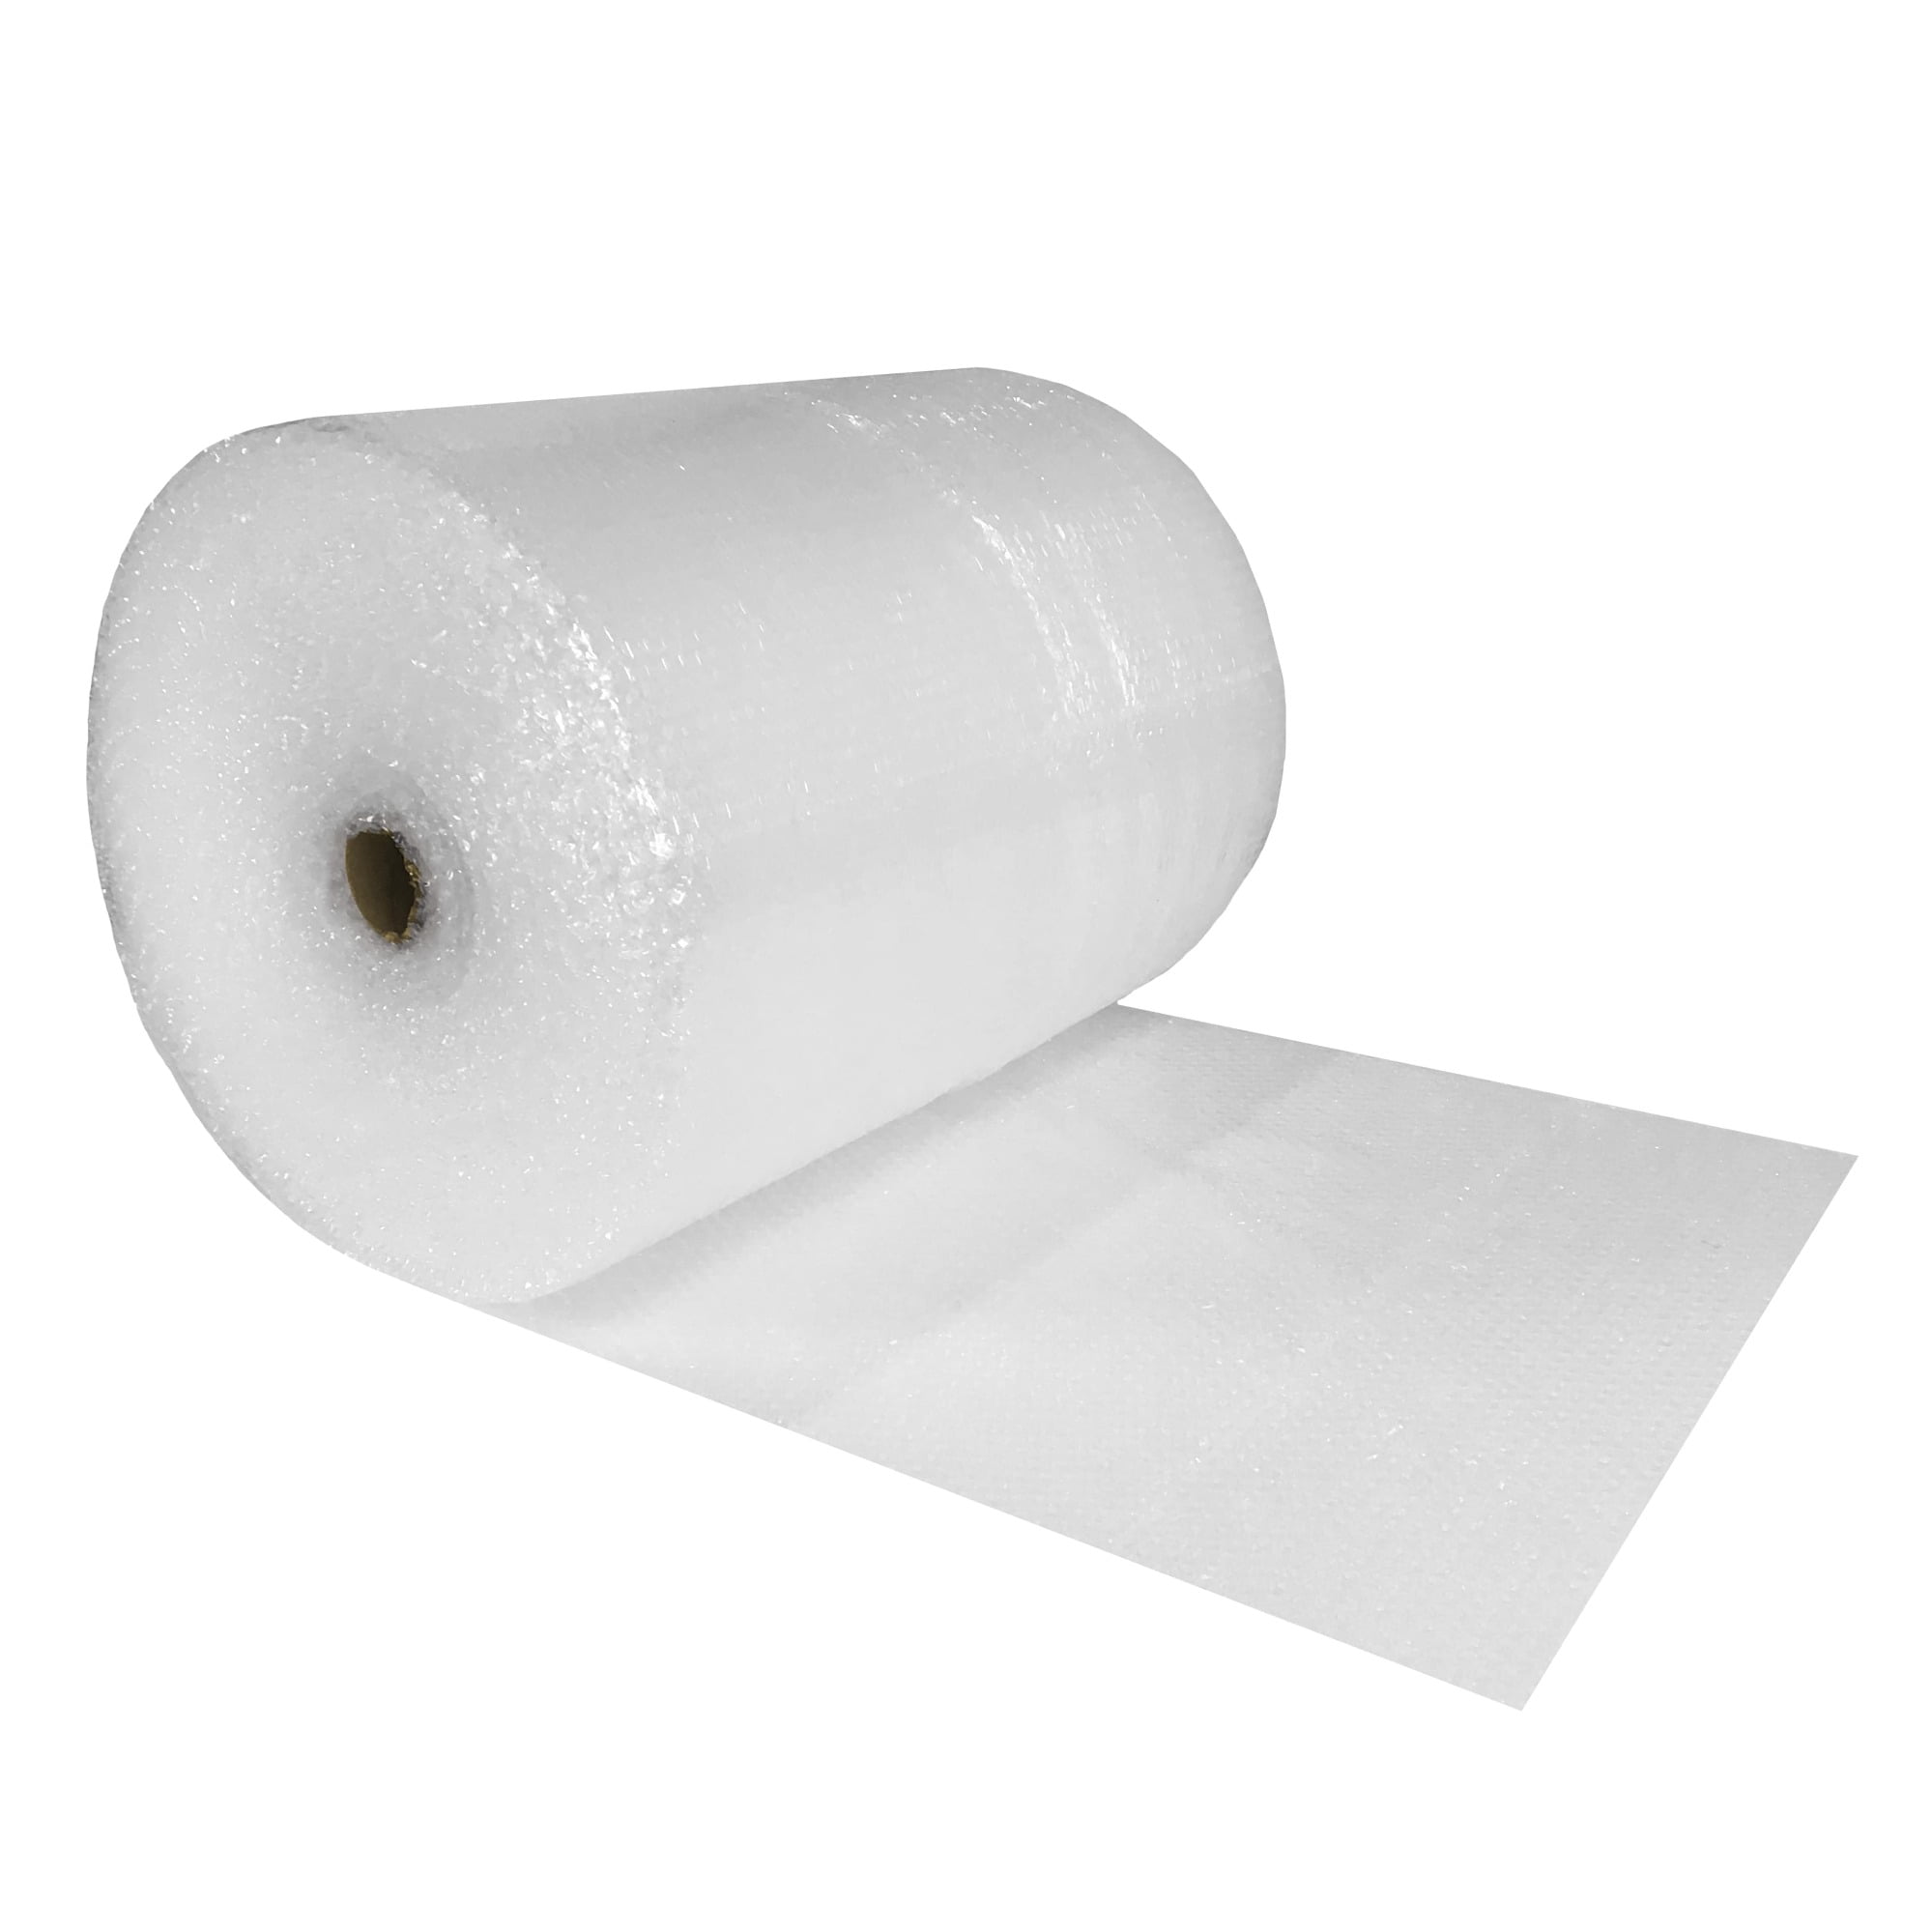 Foam Wrap Roll 1/4" x 200' x 24" Packaging Perforated Micro 200FT Perf Padding 